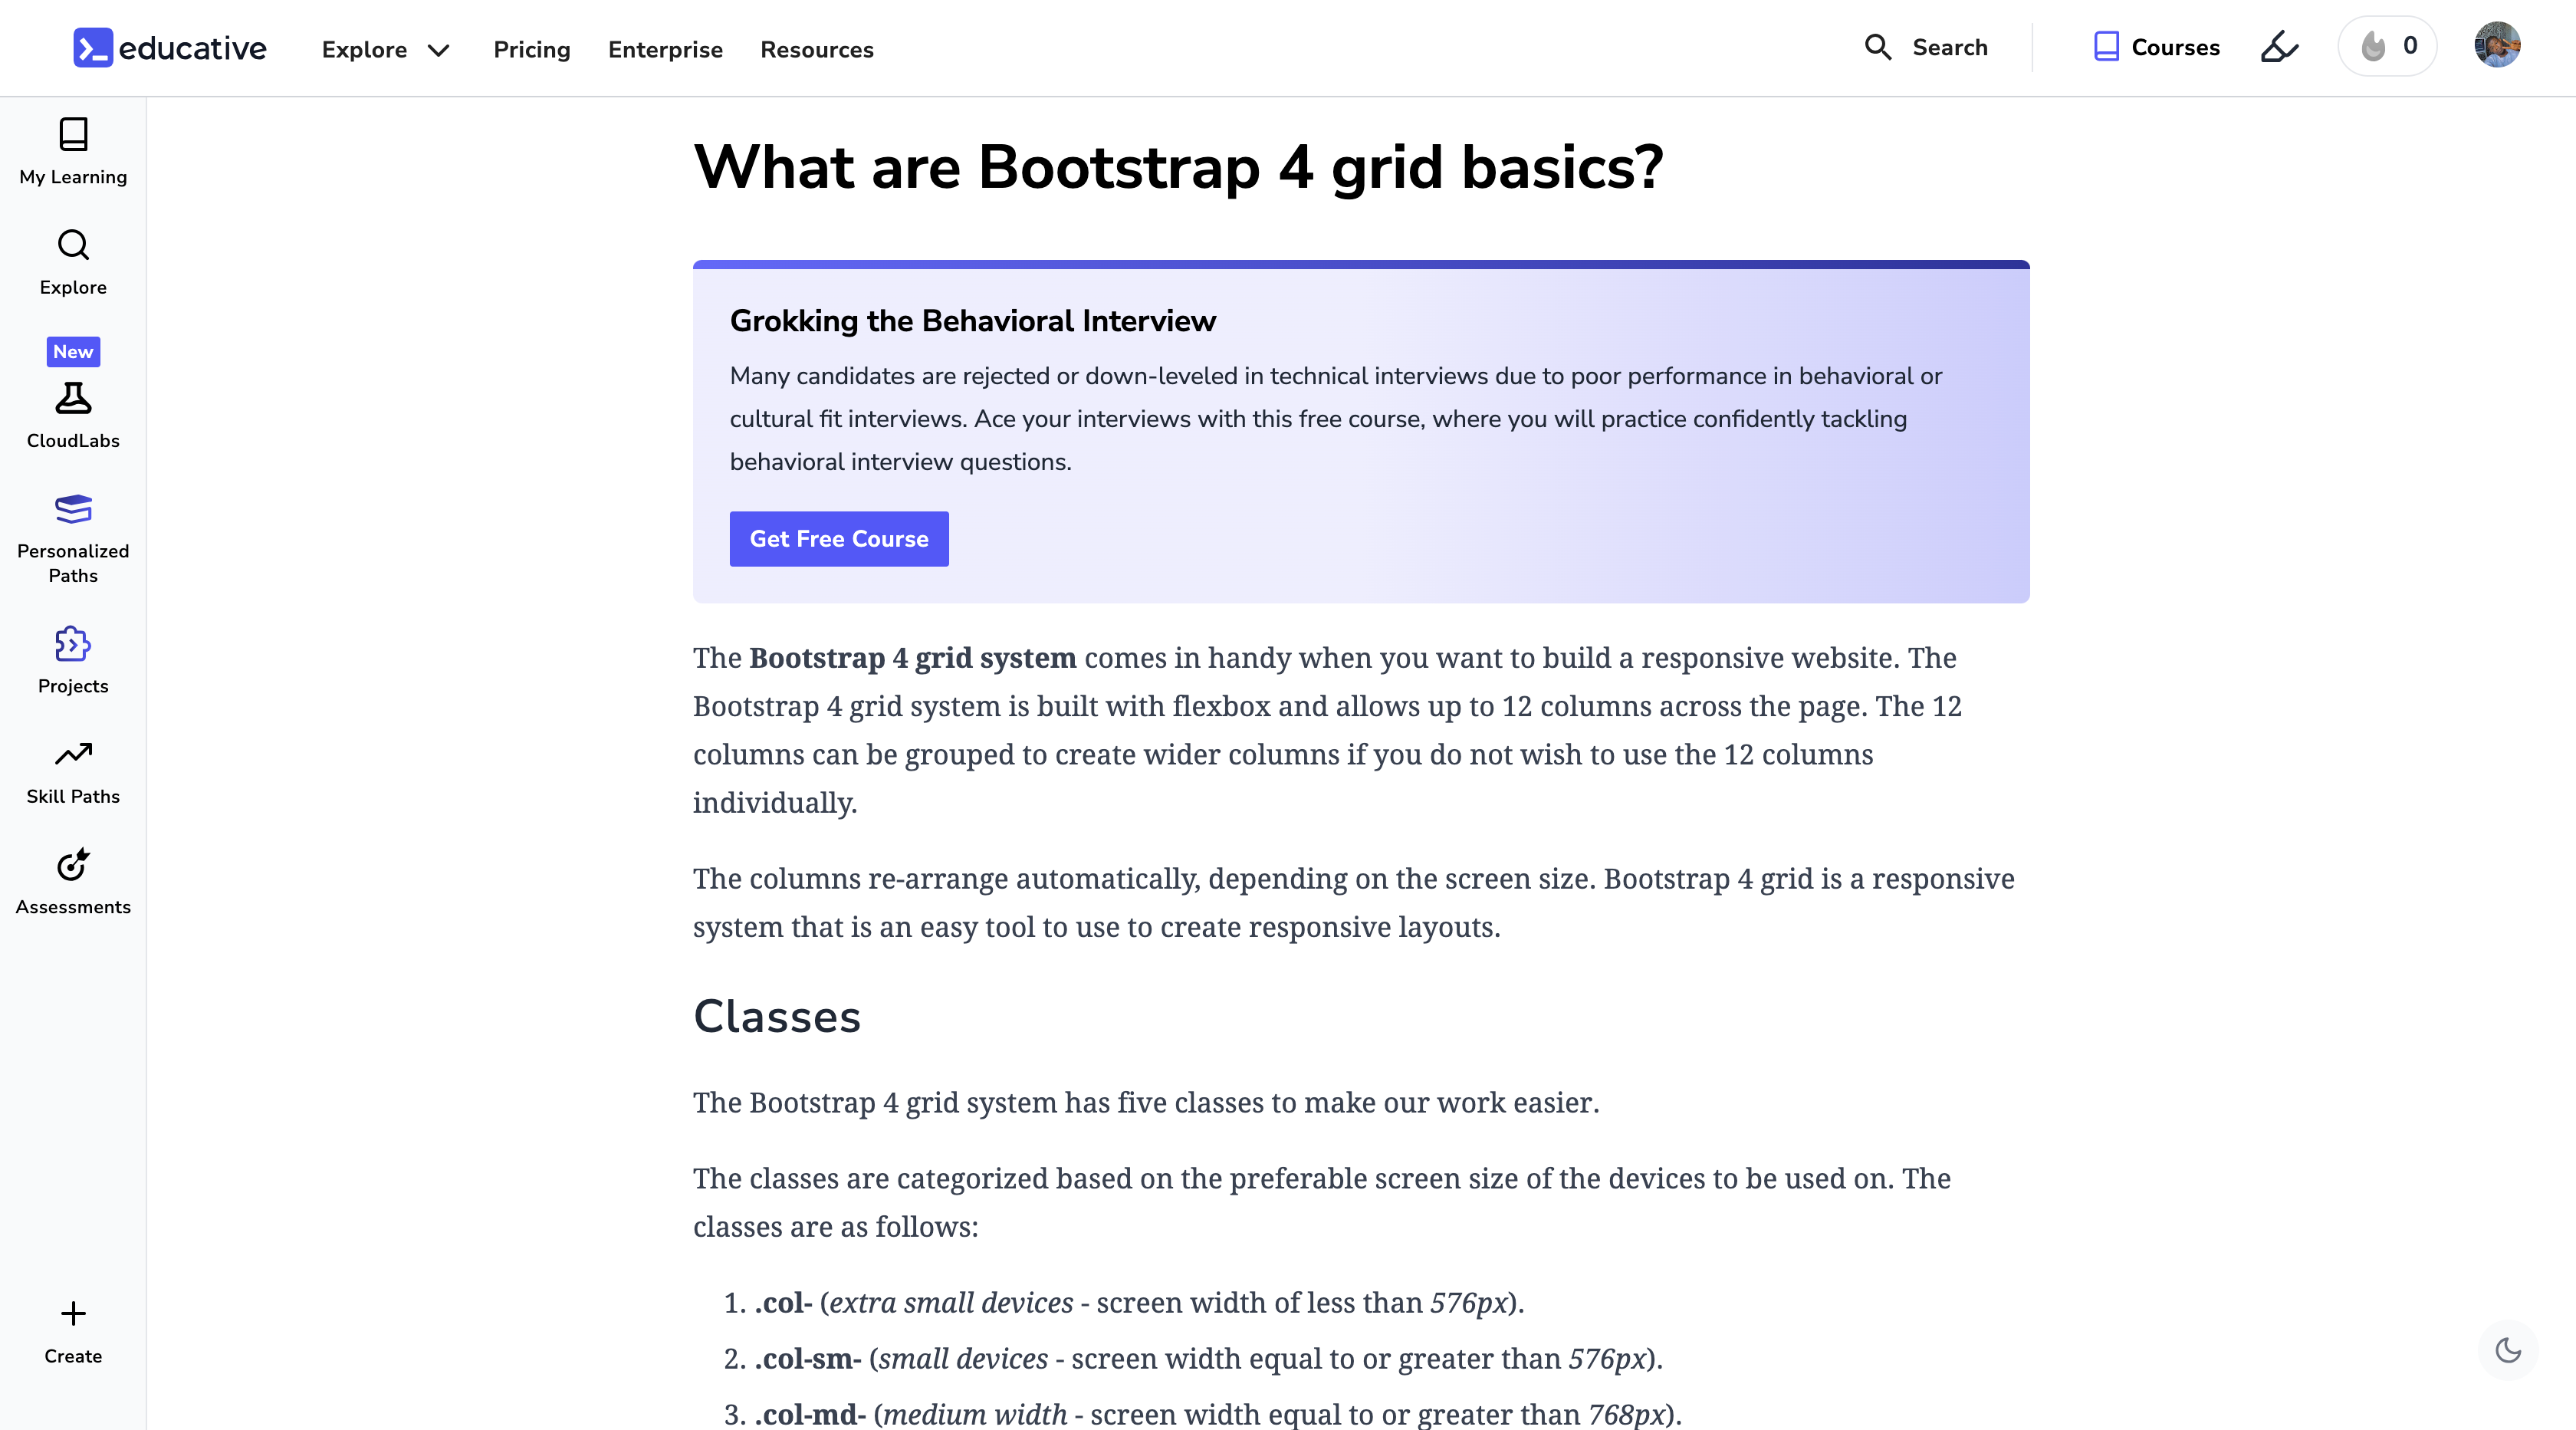 What are Bootstrap 4 grid basics?